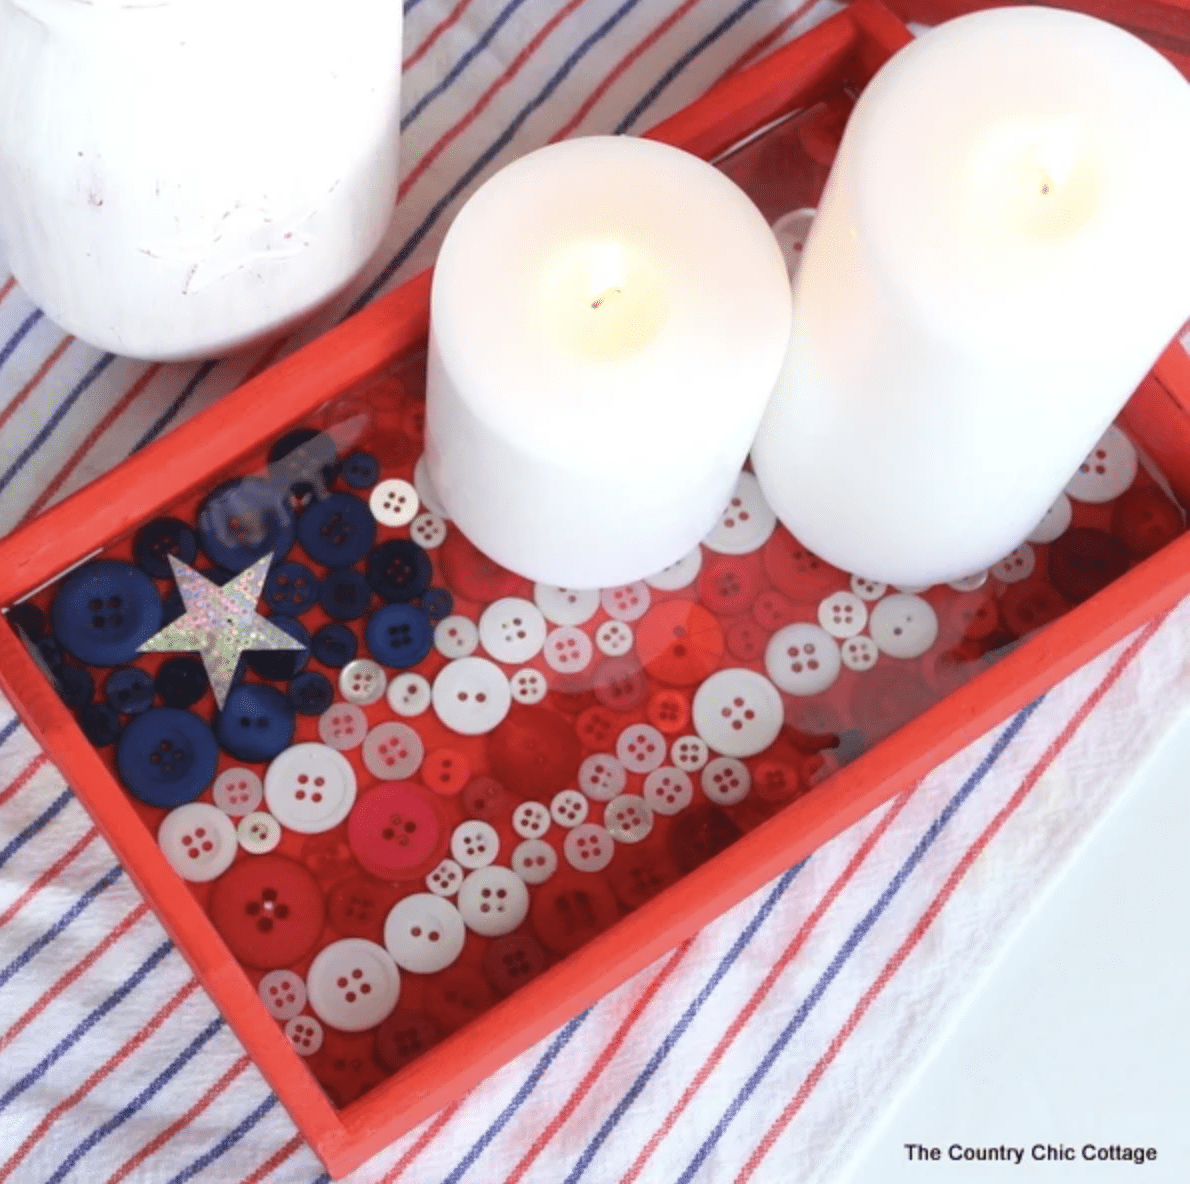 Two white candles placed in a red tray filled with an assortment of red, white, and blue buttons, perfect for Fourth of July crafts.